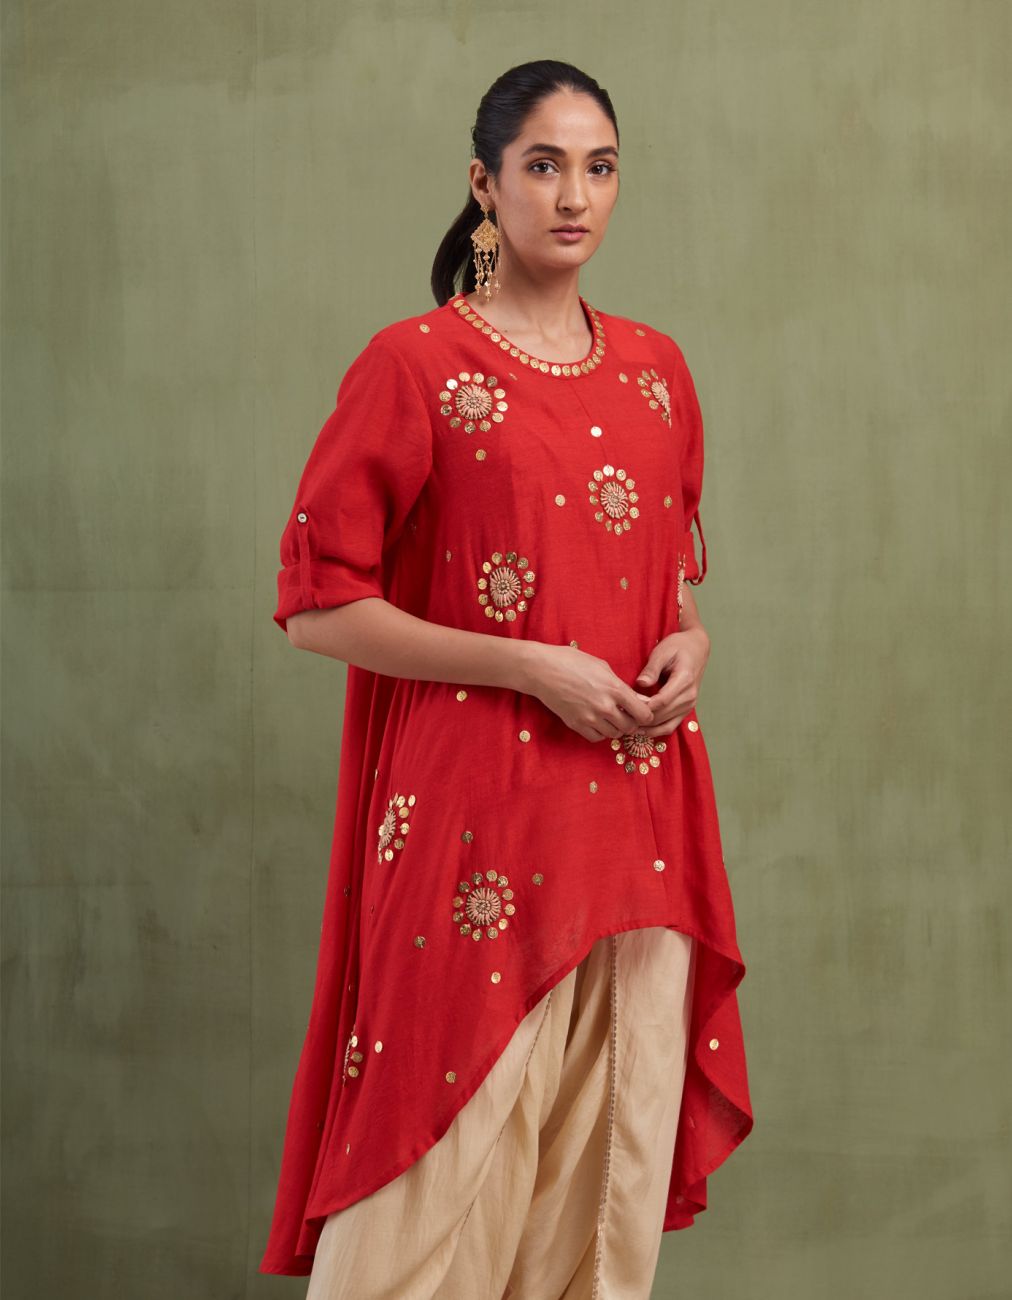 Red-Gold Asymmetrical Dhoti Set - Indian Clothing in Denver, CO, Aurora, CO, Boulder, CO, Fort Collins, CO, Colorado Springs, CO, Parker, CO, Highlands Ranch, CO, Cherry Creek, CO, Centennial, CO, and Longmont, CO. Nationwide shipping USA - India Fashion X